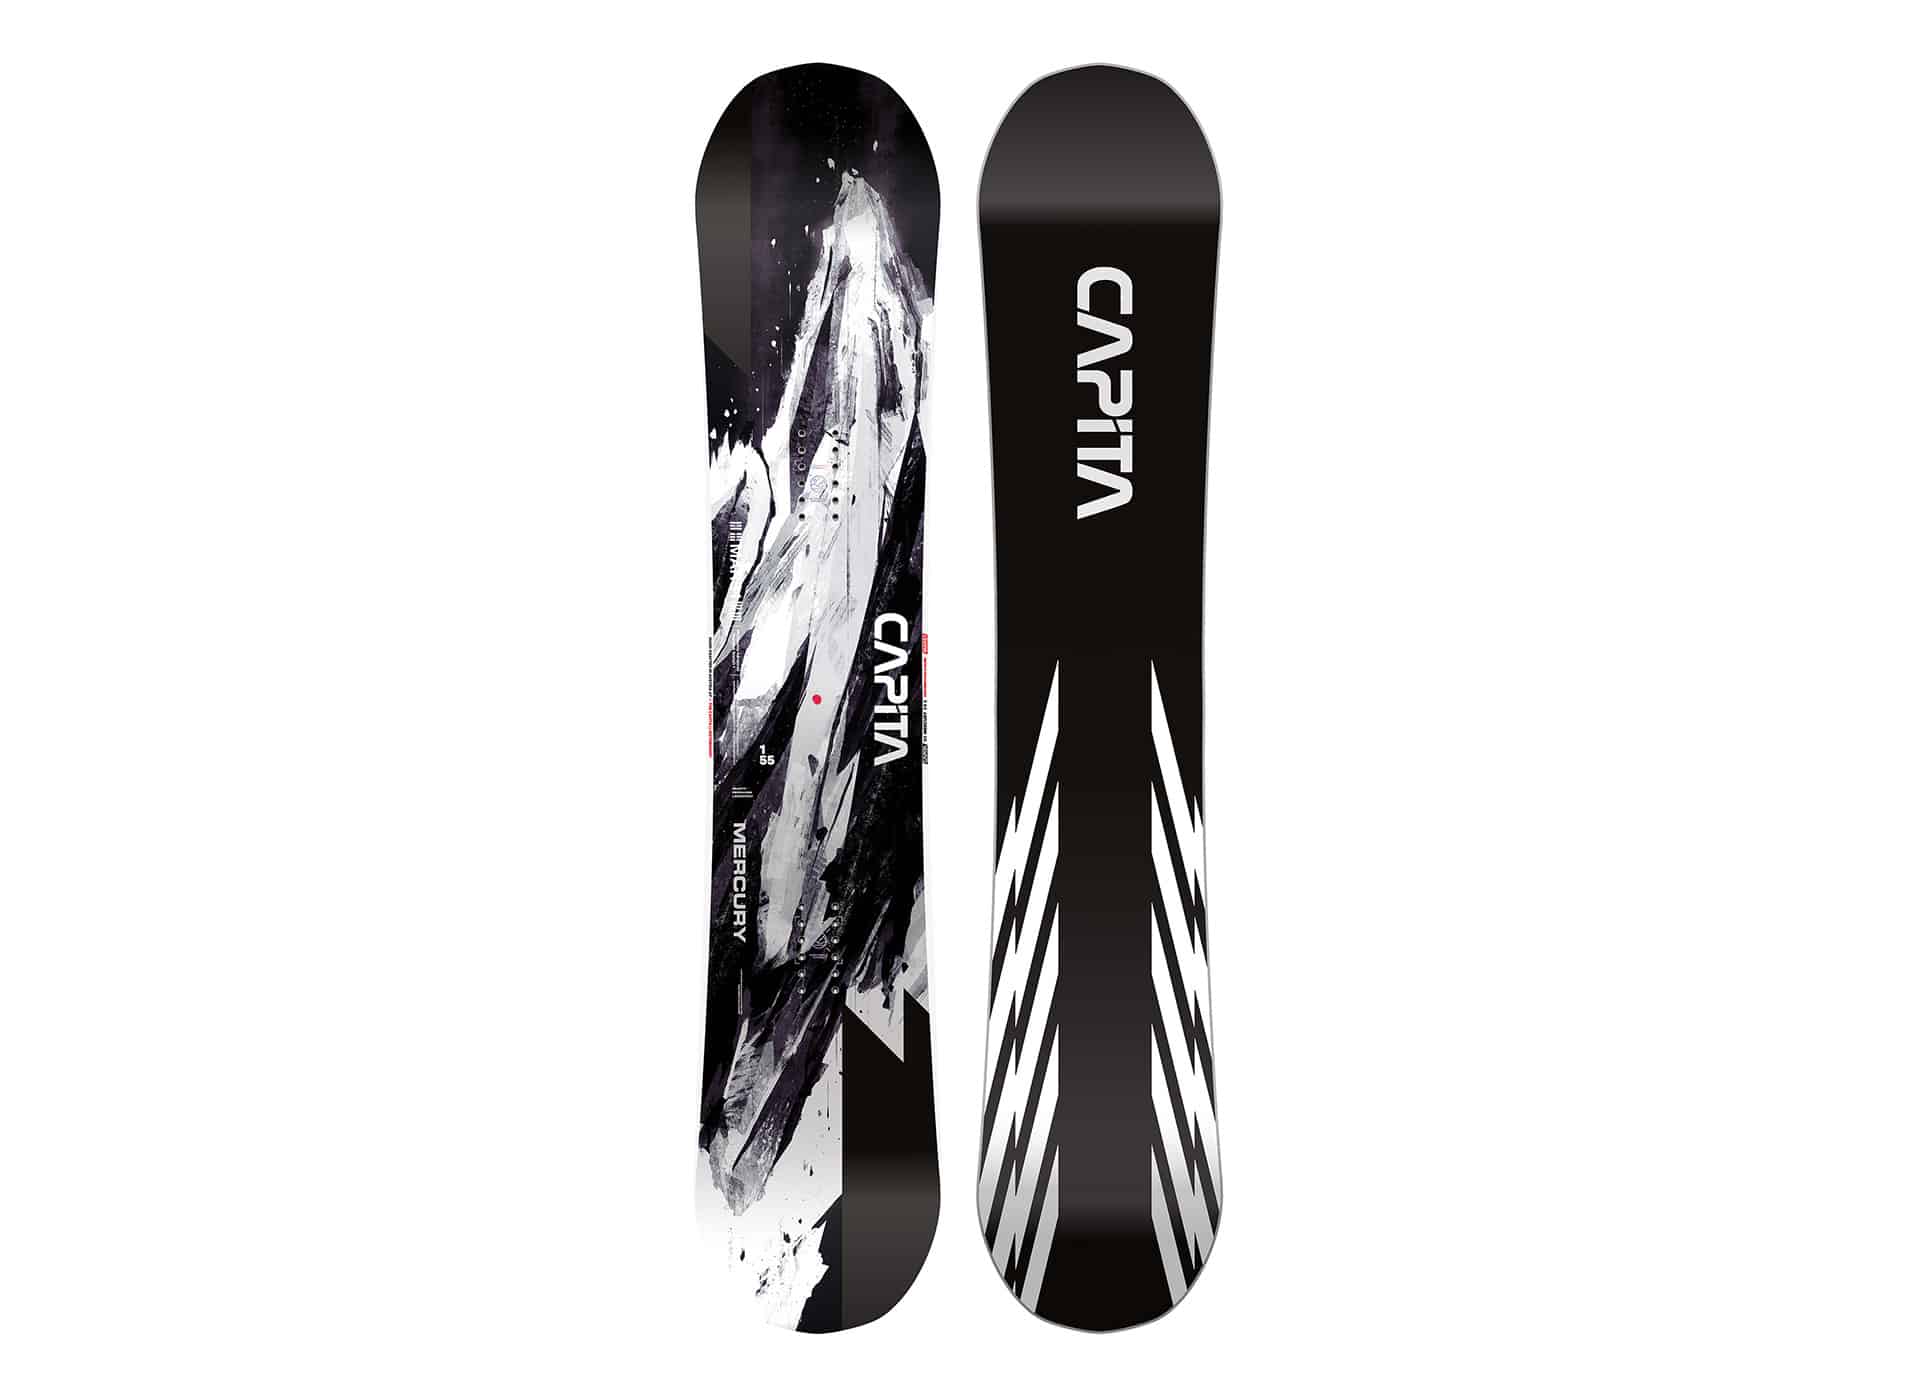 Best All-Mountain Snowboards | Tactics